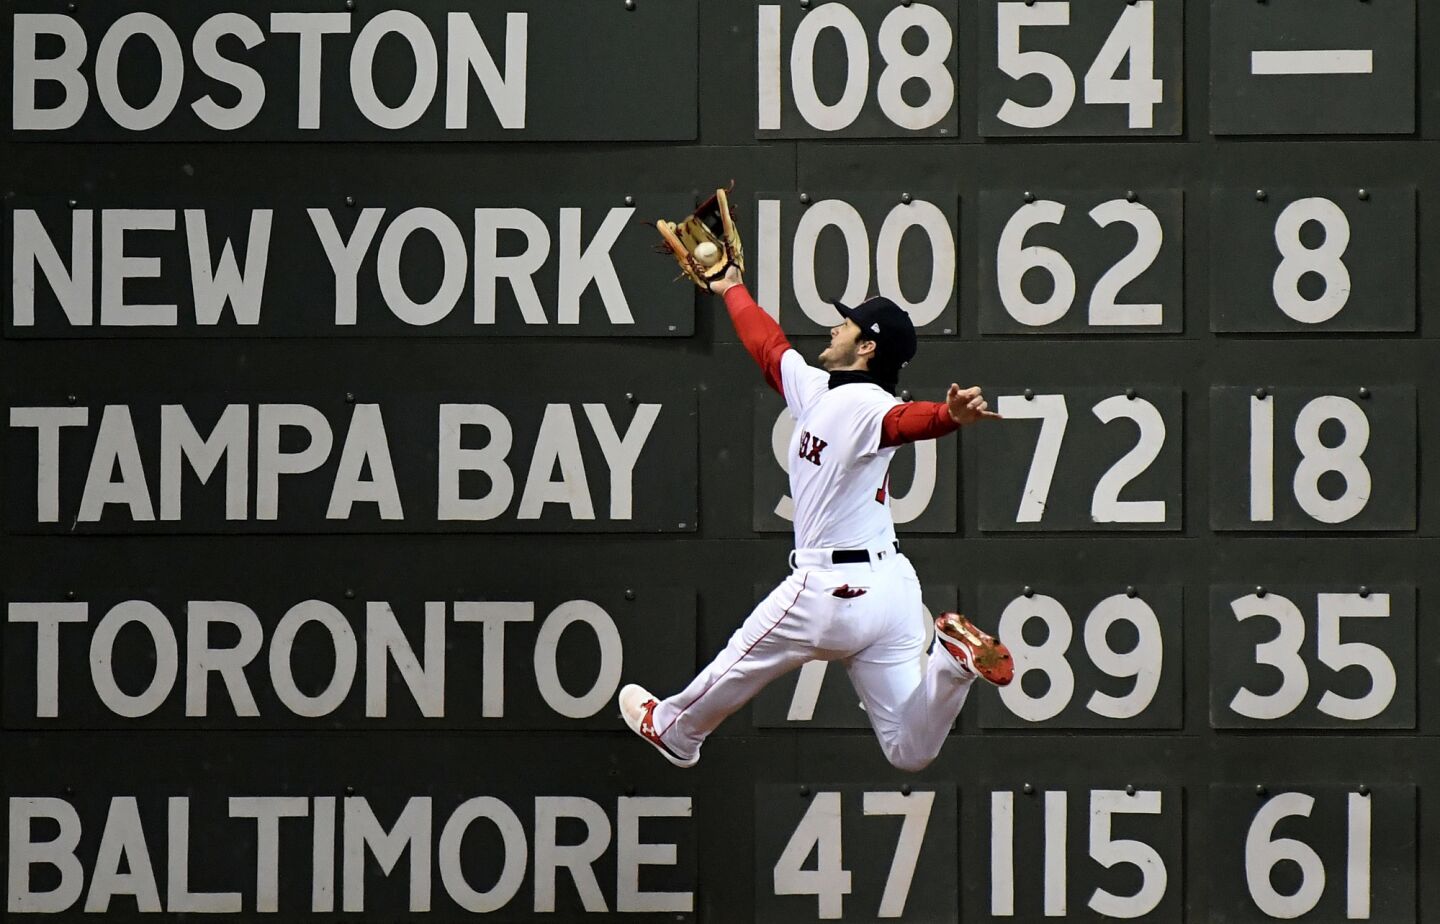 Red Sox Andrew Benintendi makes a leaping catch hit by Dodgers Brian Dozier in the 5th inning of Game 2 of the World Series at Fenway Park.